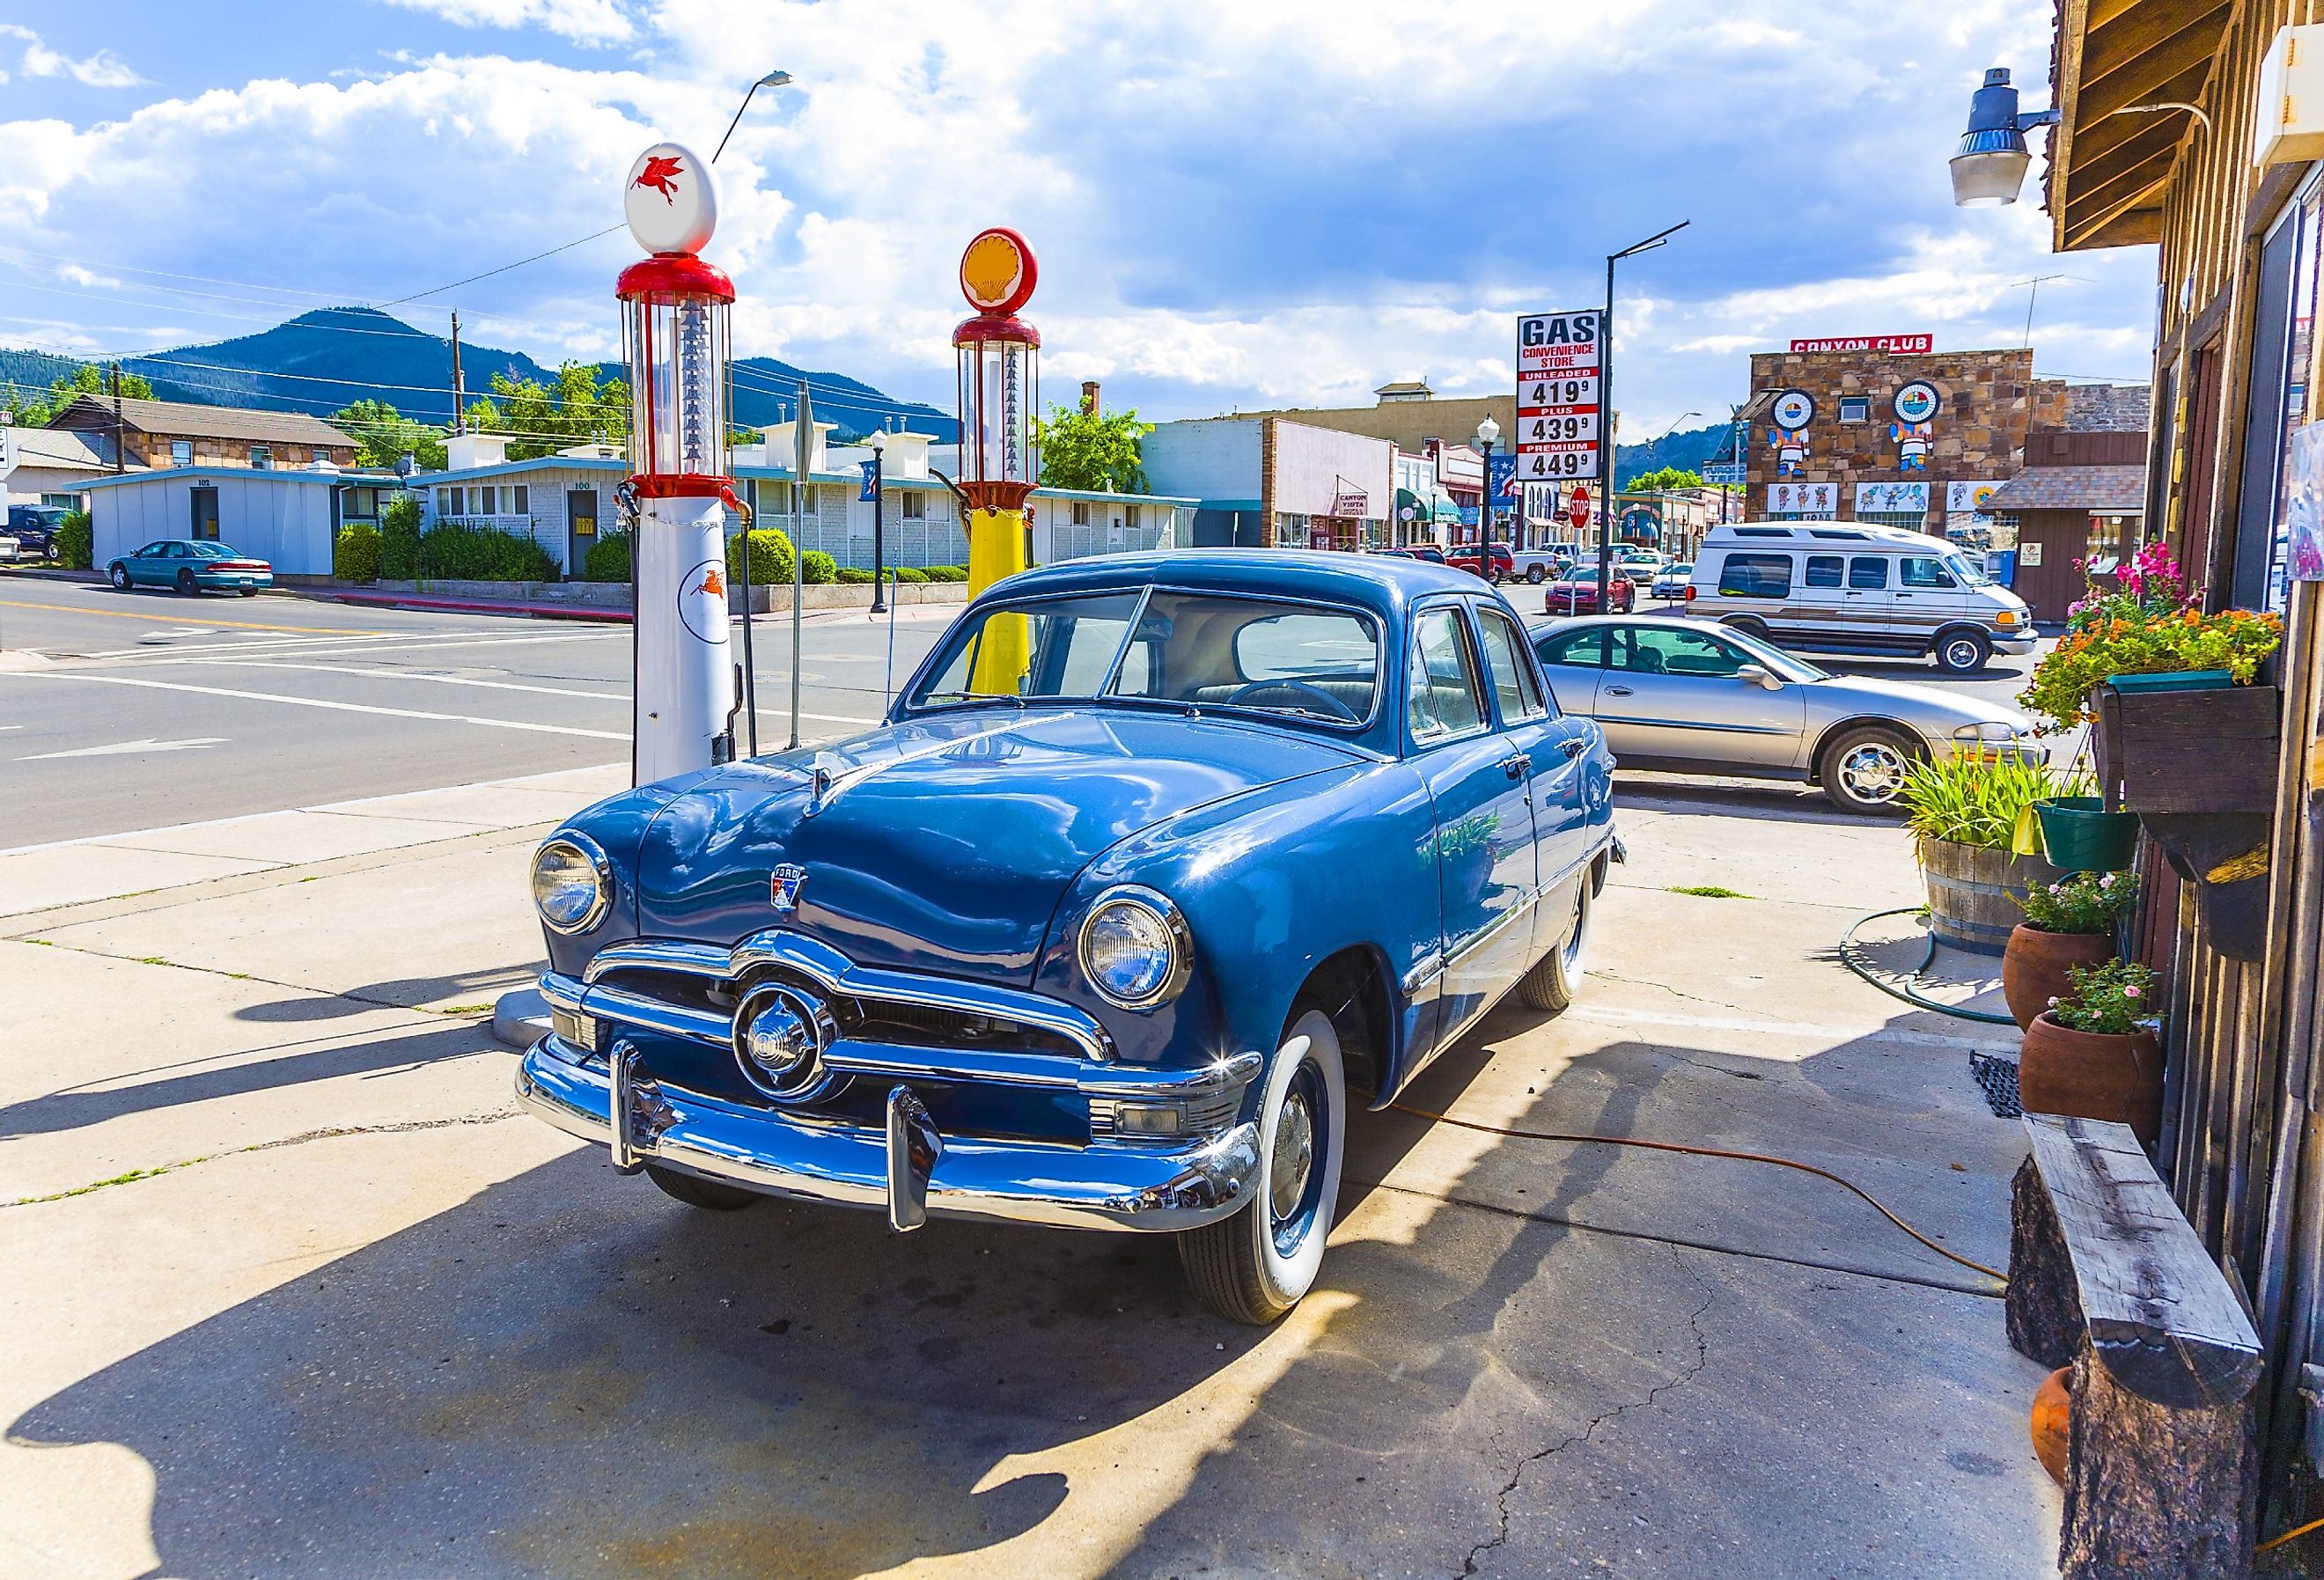 Od retro filling station in Williams, Arizona, with the mountains in the background. Image credit travelview via Shutterstock